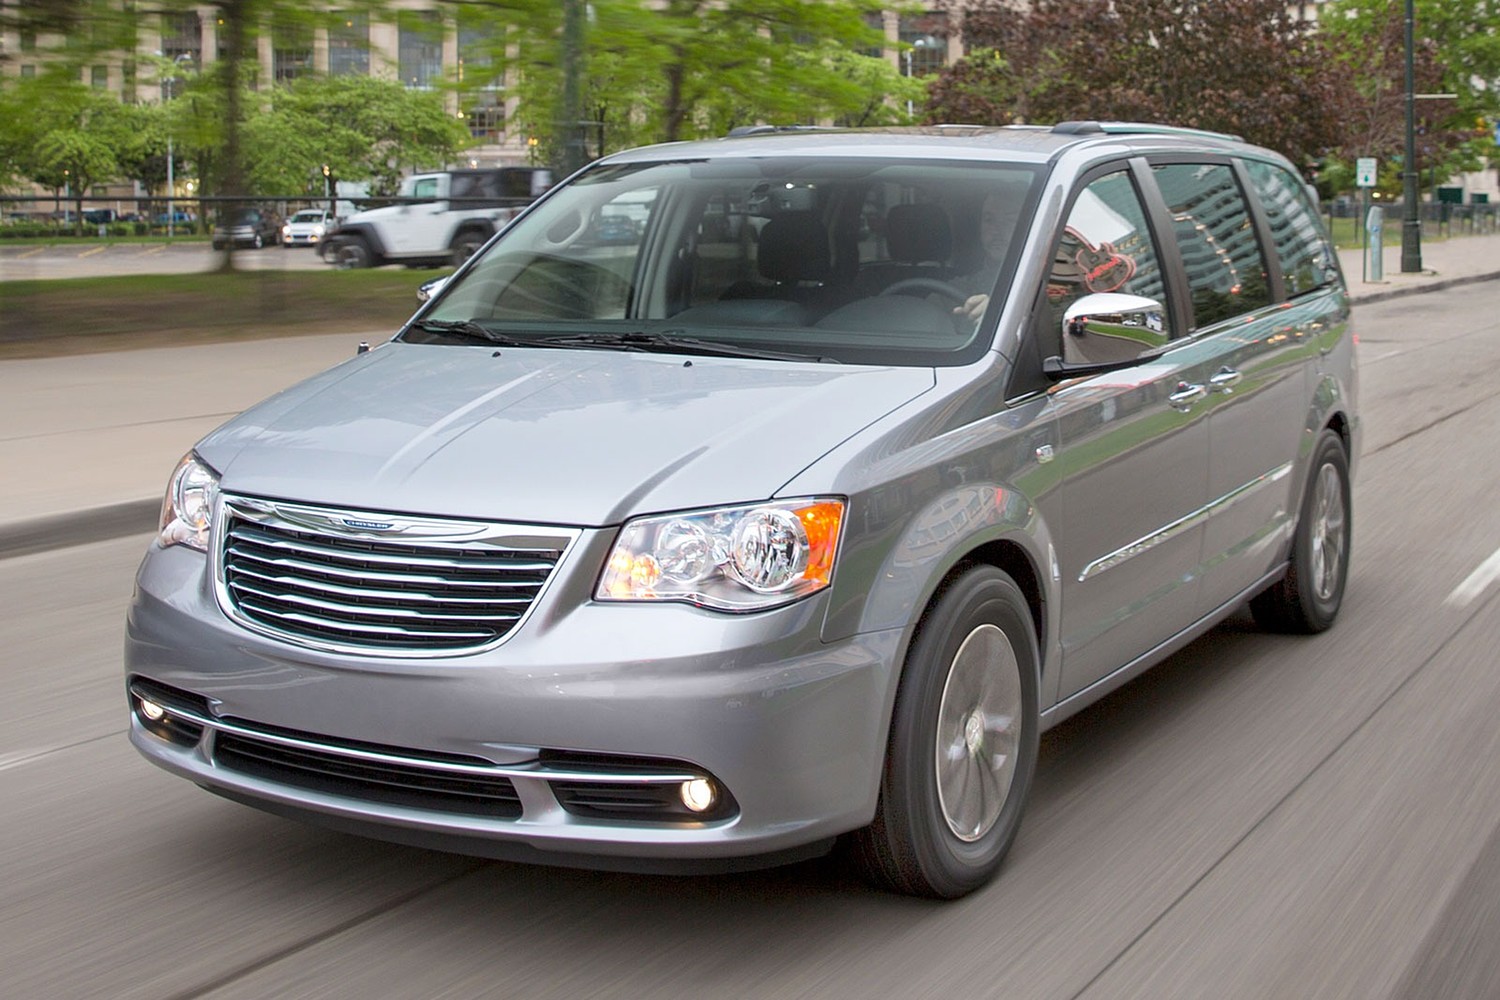 2016 Chrysler Town and Country Anniversary Edition Passenger Minivan Exterior